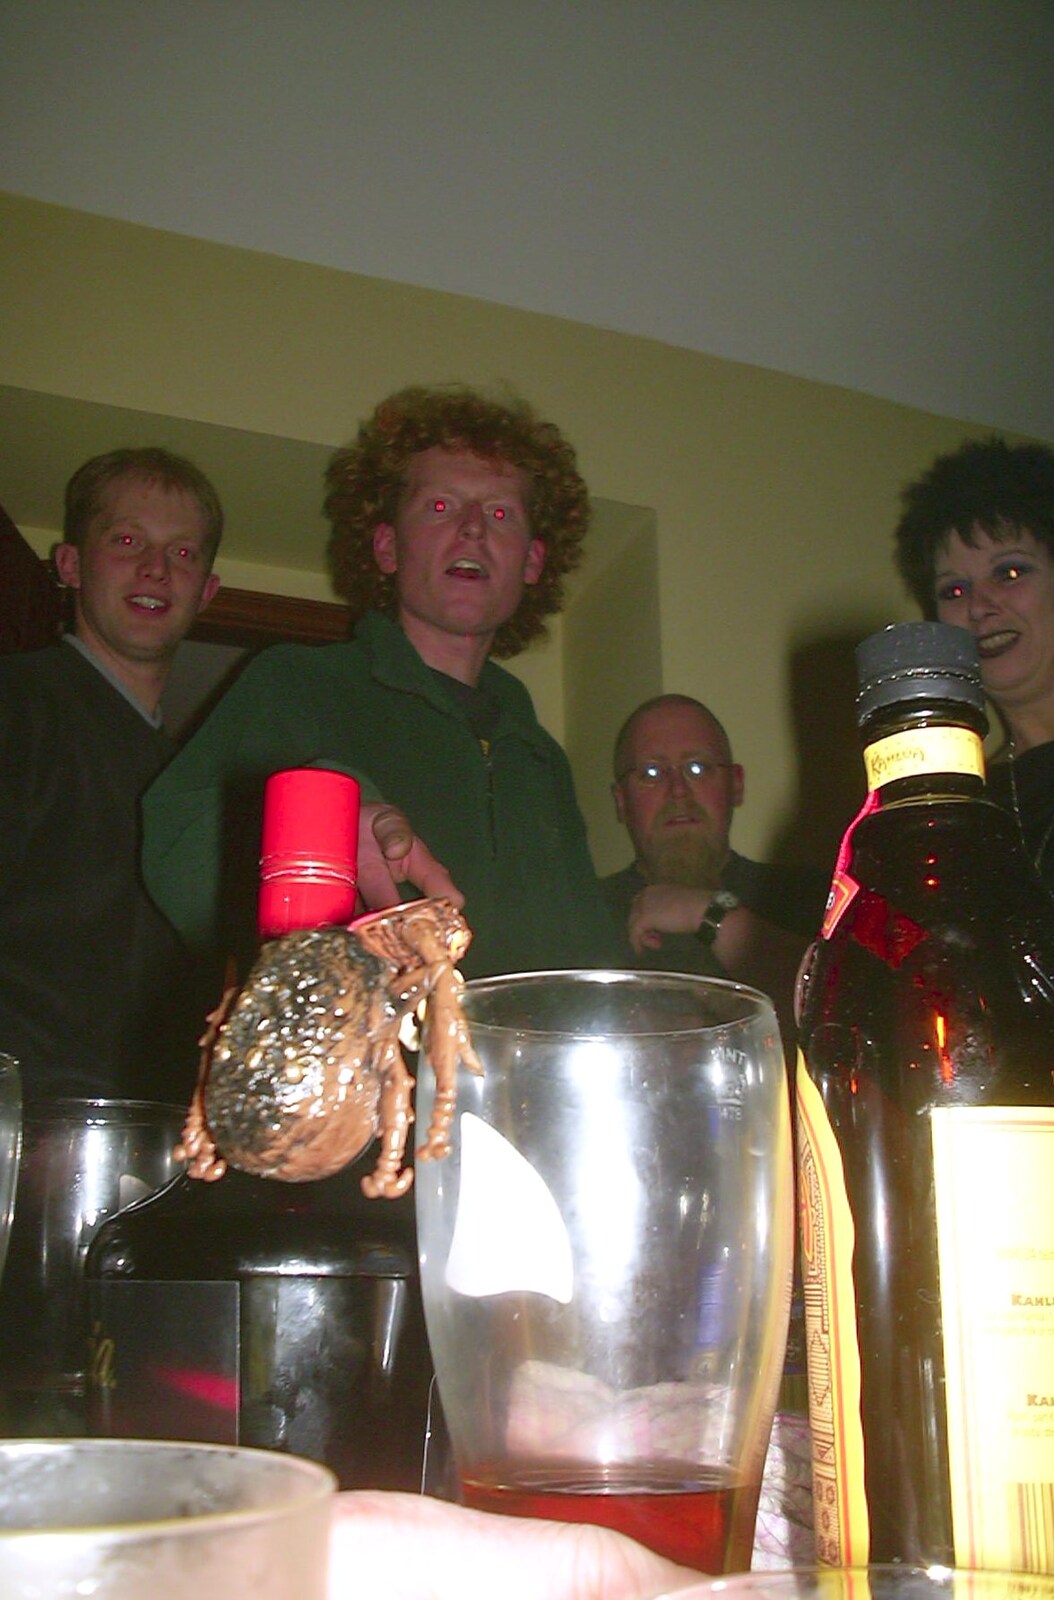 There's something weird on a pint glass from Anne's Gothic Night, Thorndon - 25th January 2003